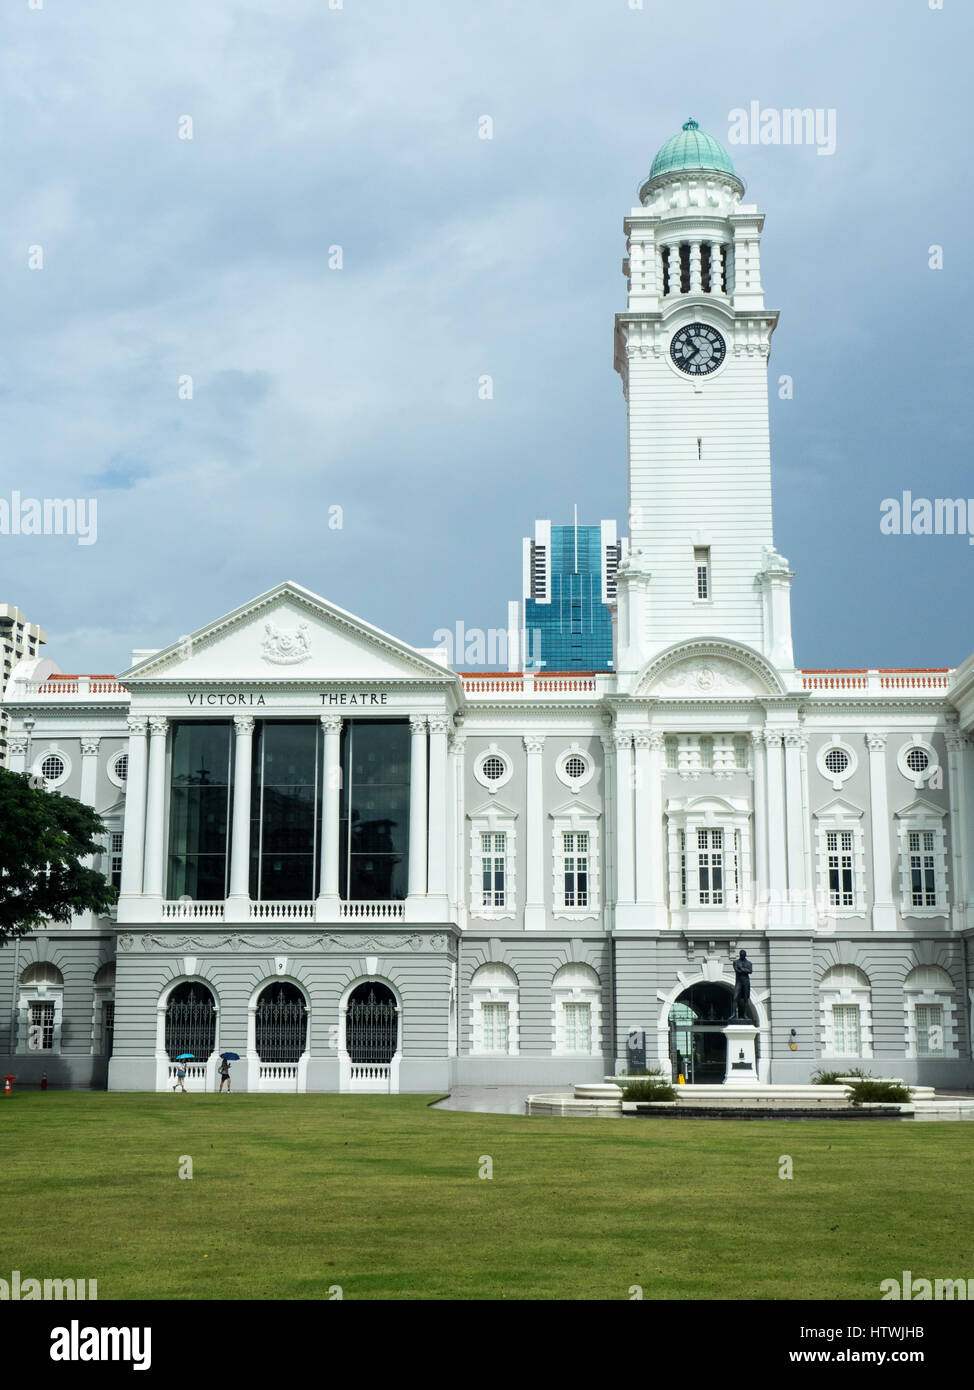 The Victoria Theatre and Concert Hall, Singapore. Stock Photo